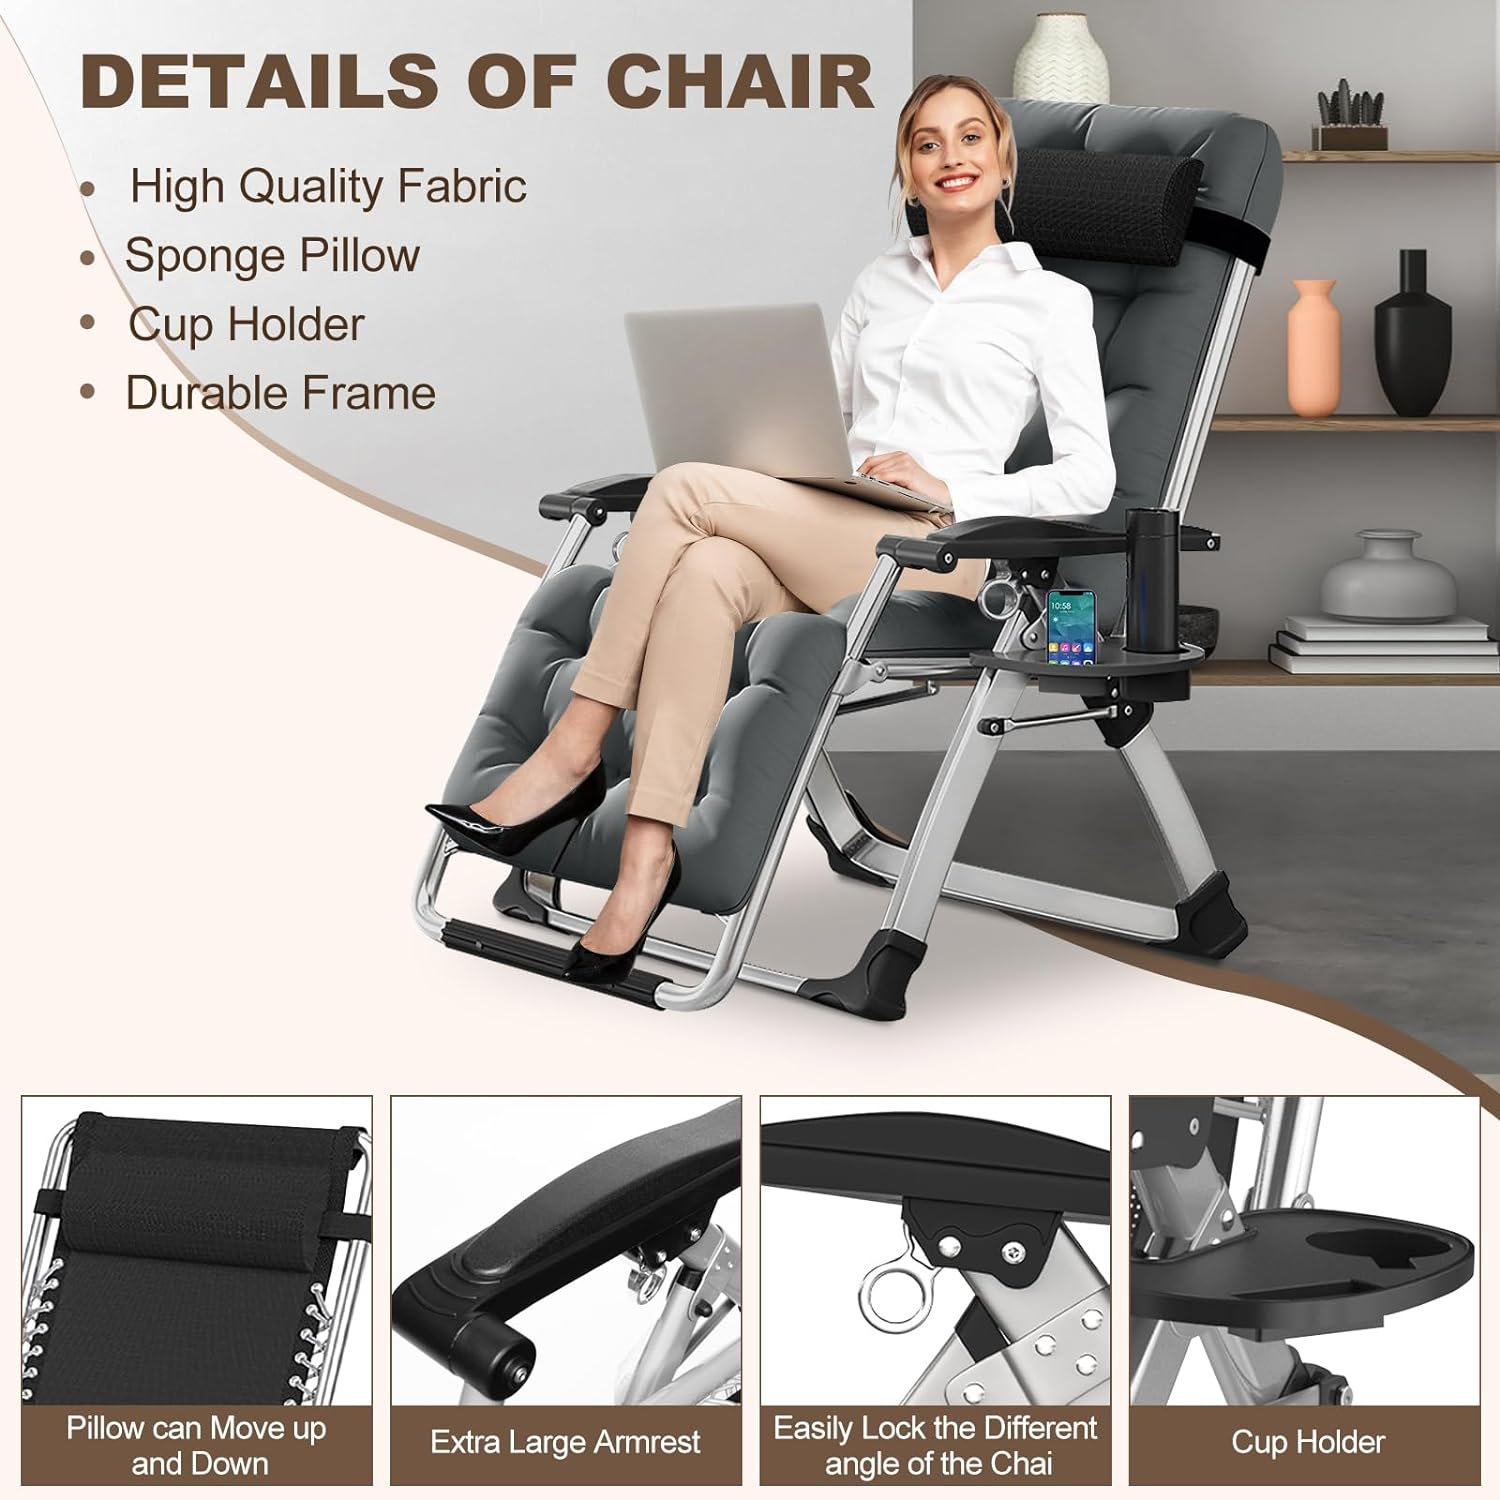 DoCred Comfy Chair Review